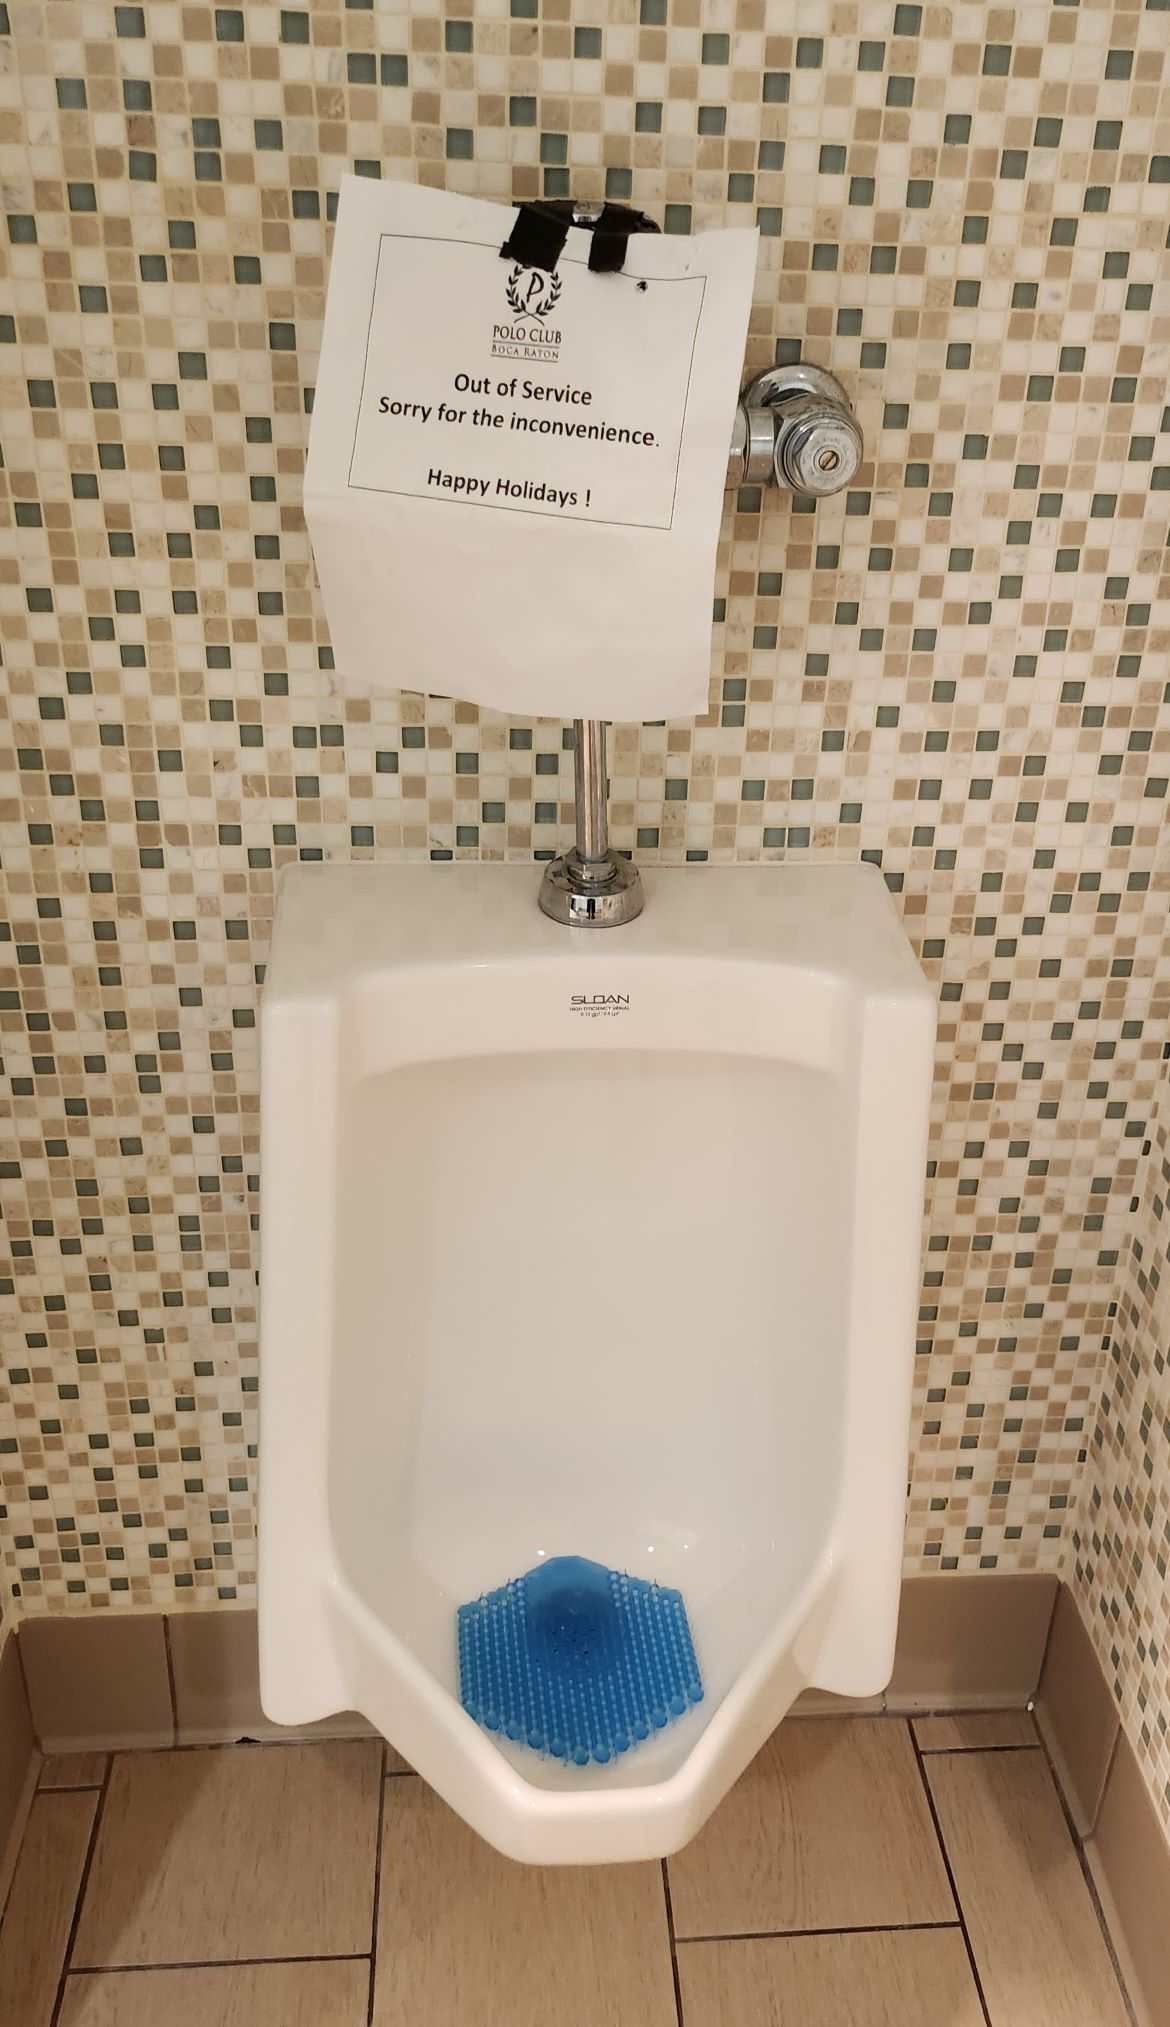 out of order clogged urinal